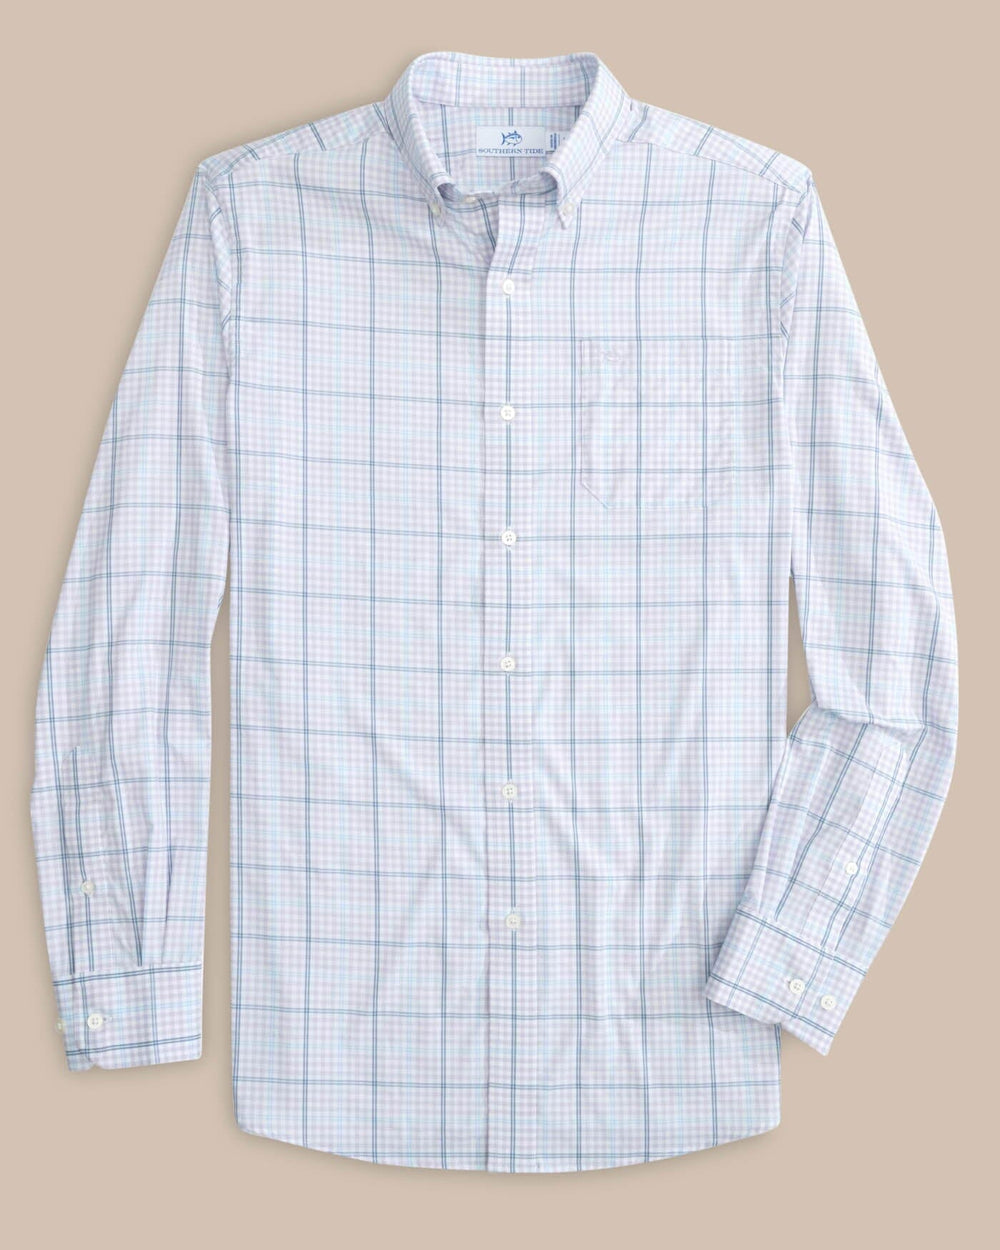 The front view of the Southern Tide brrr Intercoastal Rainer Check Long Sleeve Sportshirt by Southern Tide - Orchid Petal